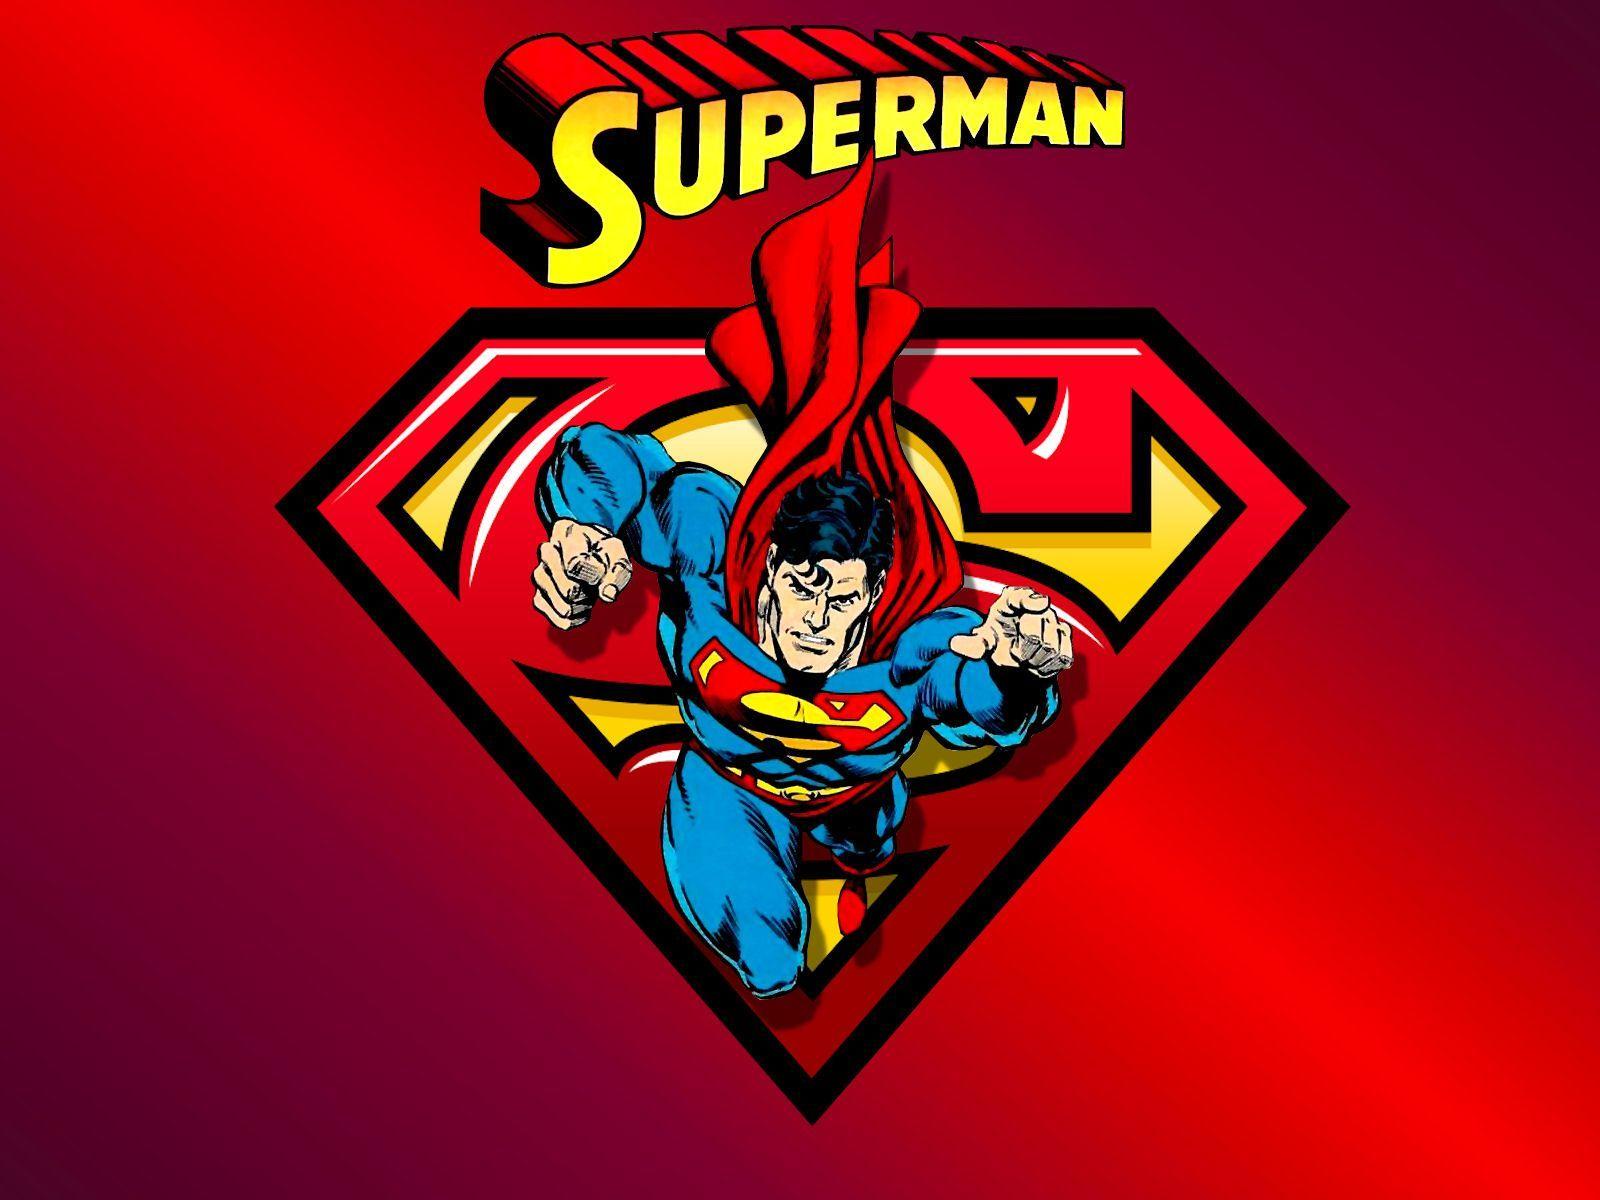 Superman Wallpapers 1 by Superman8193